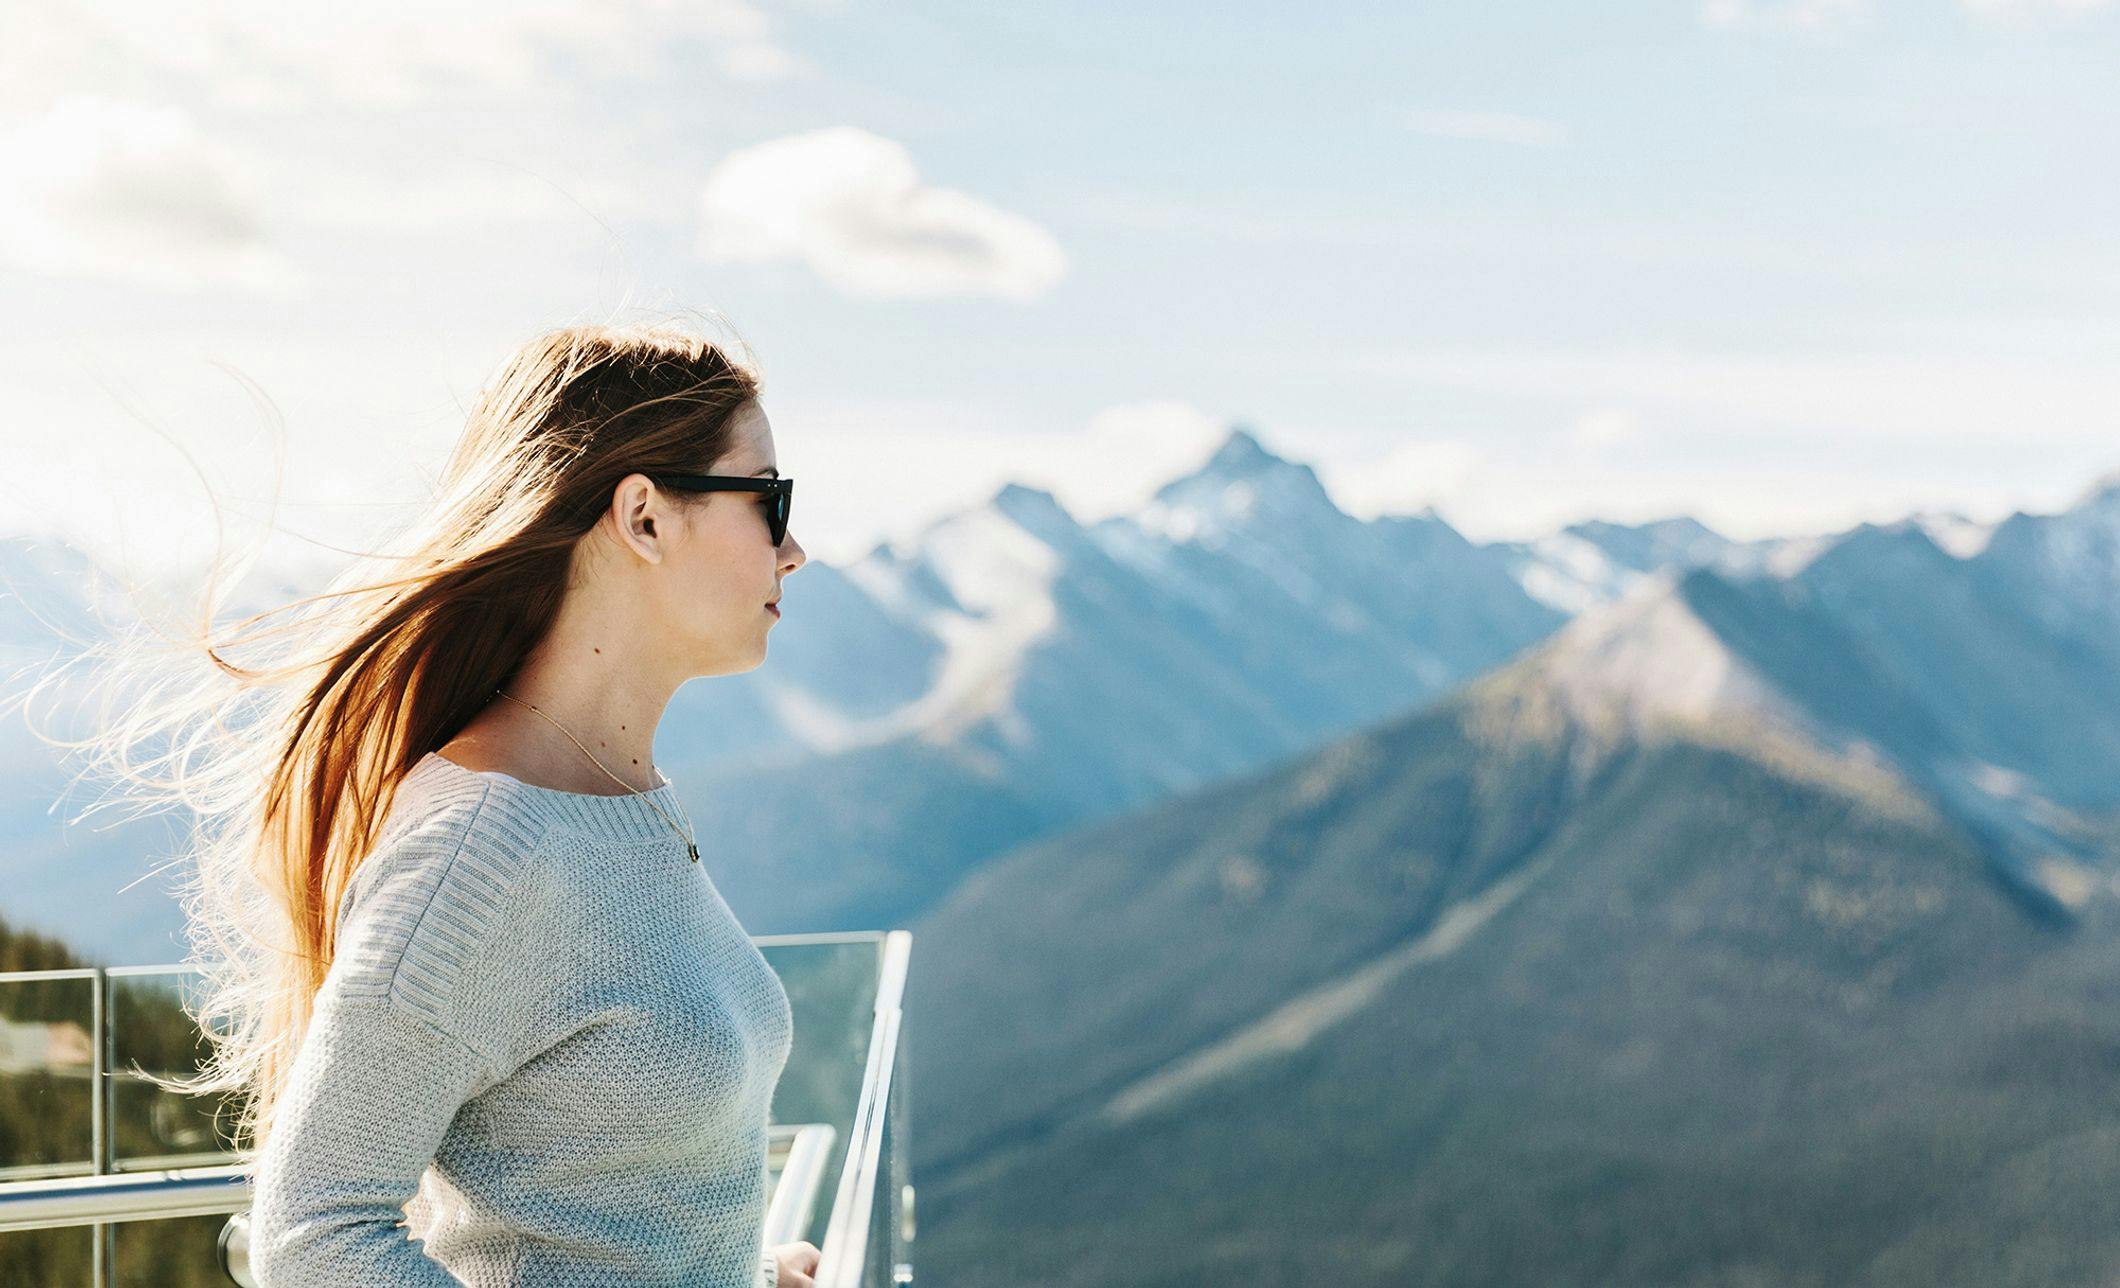 Standing at the summit of Sulphur Mountain looking at the beautiful view